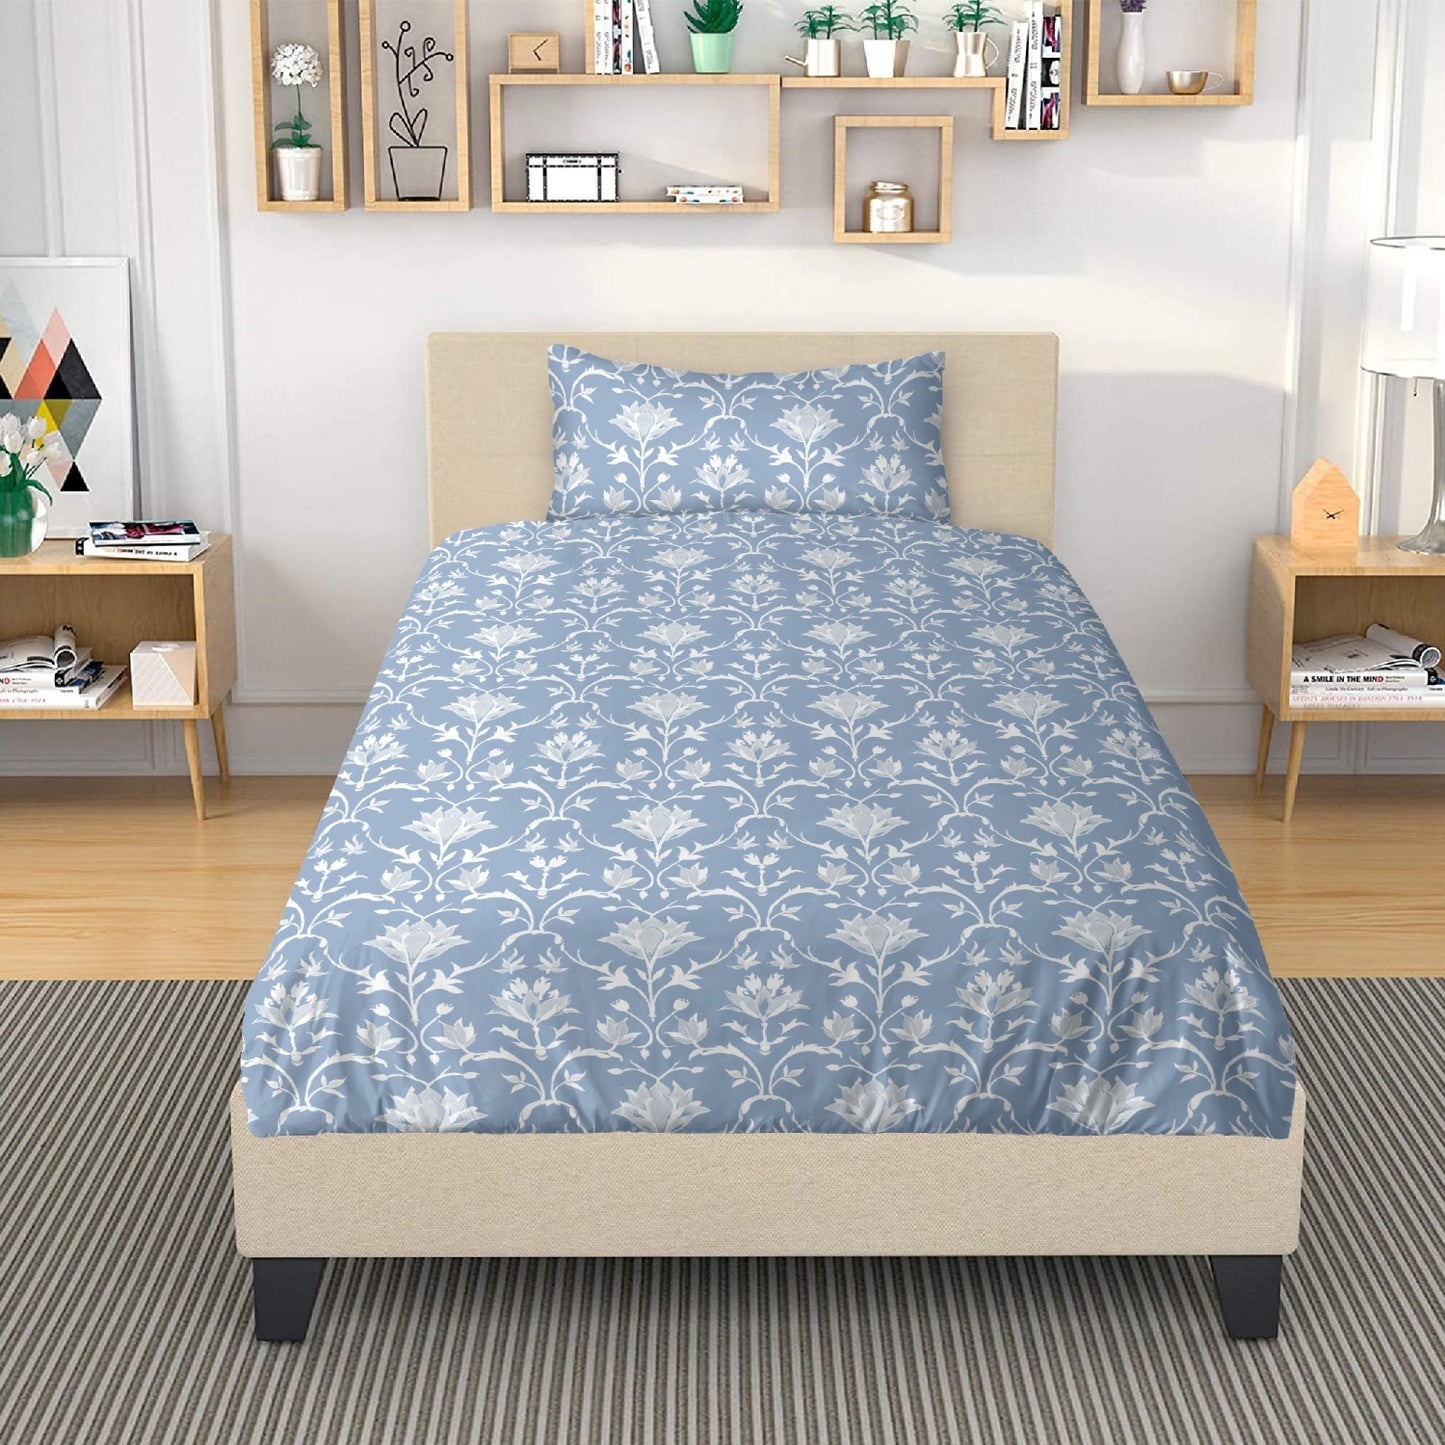 Inspired by Wedgwood Bedding Set